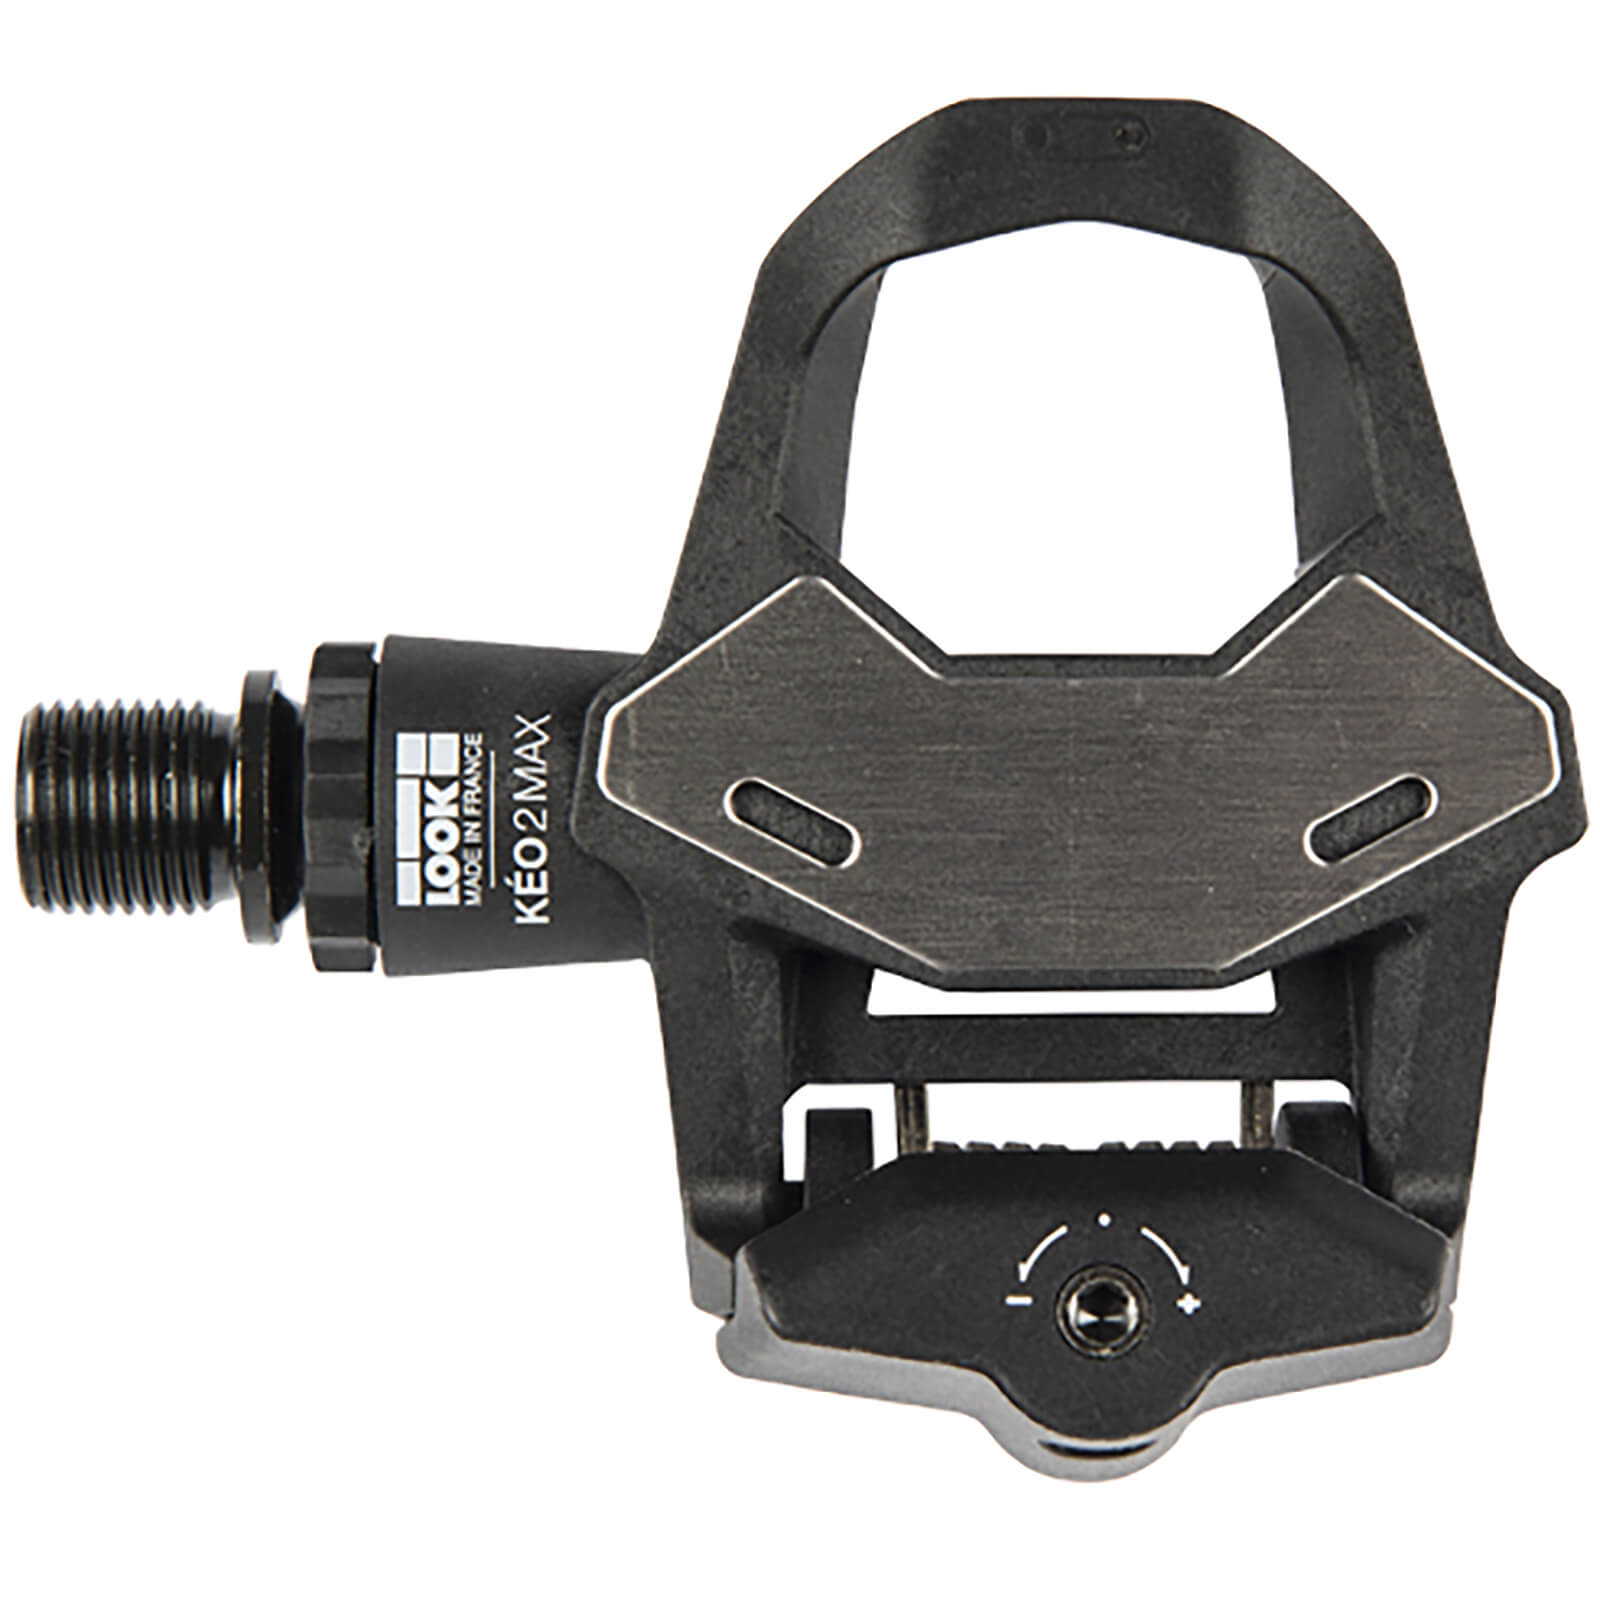 Image of Look Keo 2 Max Pedals - Black